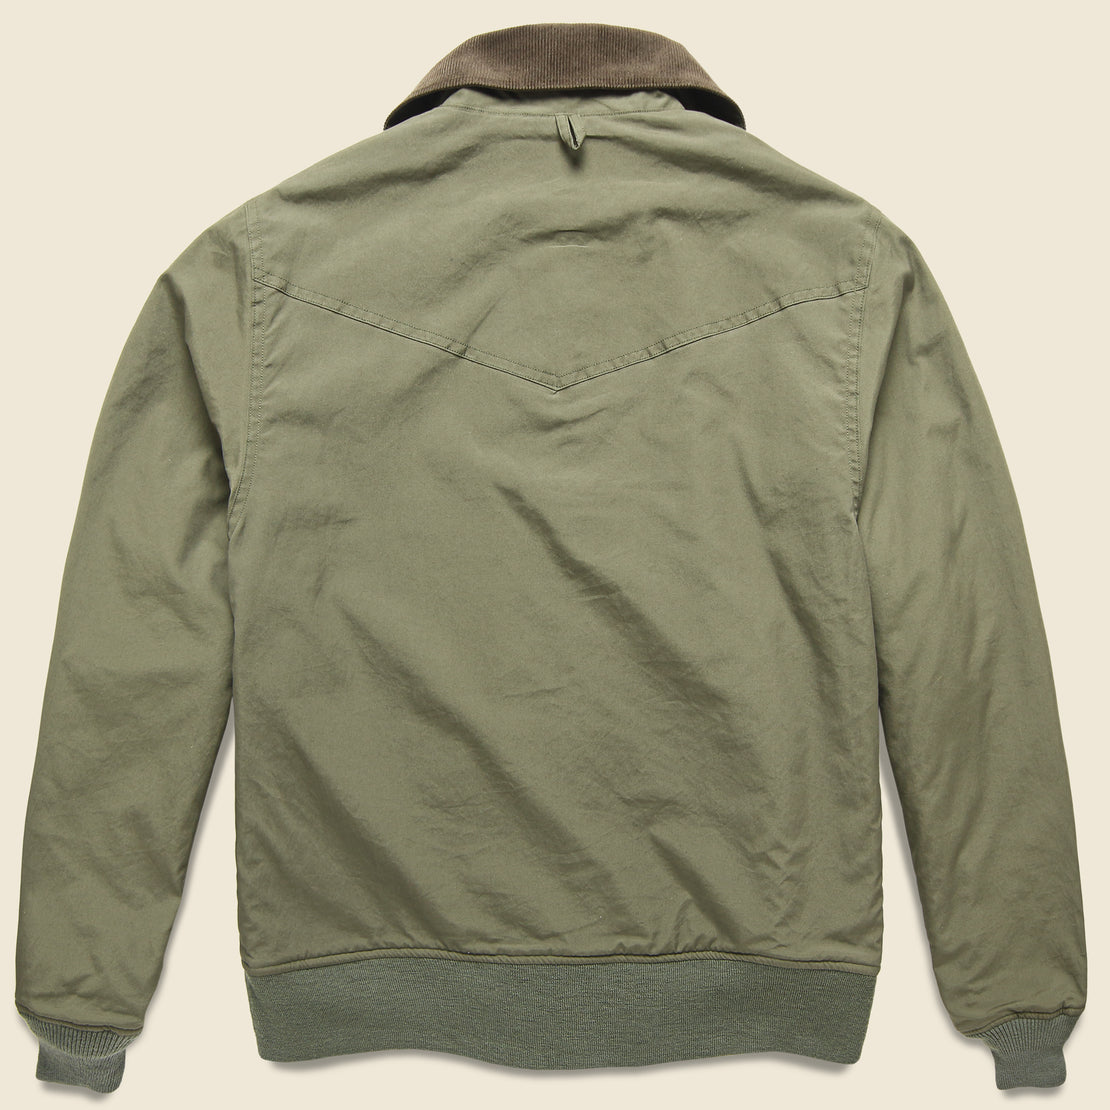 Vancloth Short Field Jacket - Olive - Monitaly - STAG Provisions - Outerwear - Coat / Jacket